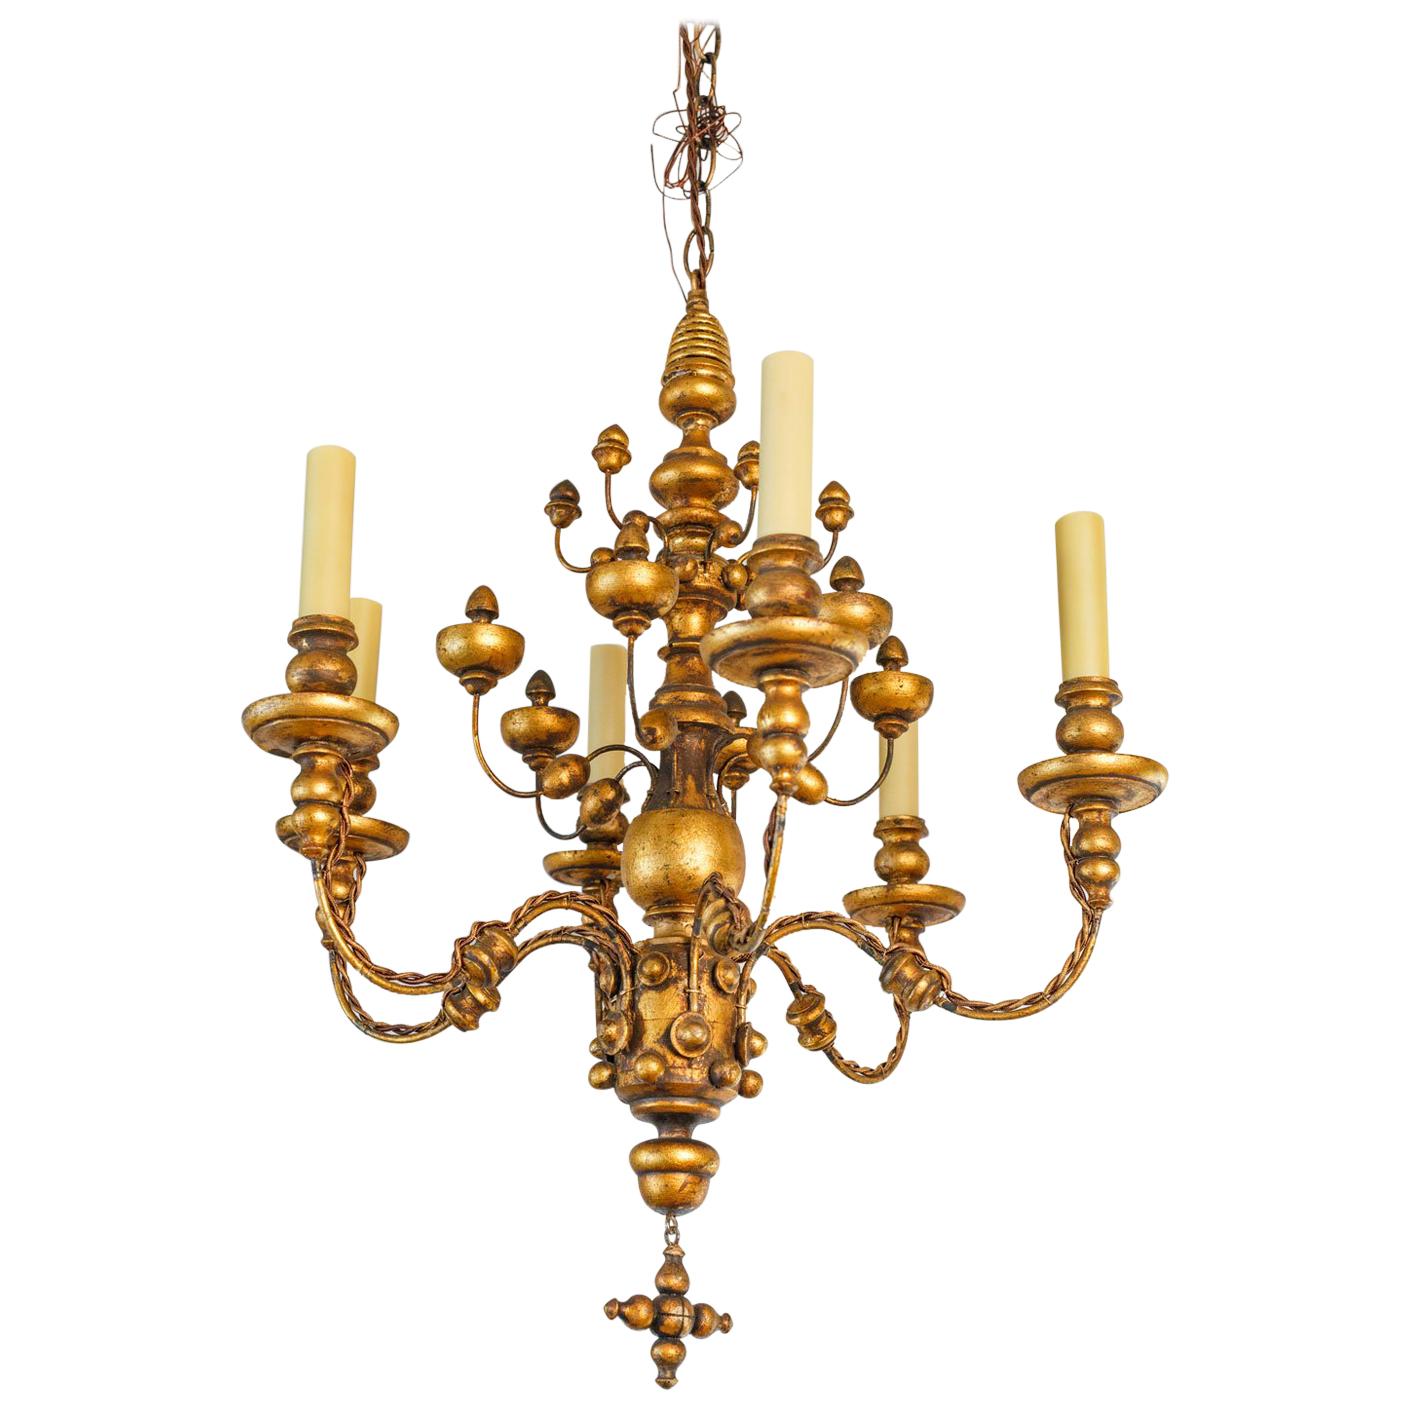 Stunning Gilt  Italian Chandelier of Metal and Wood with  playful design. 